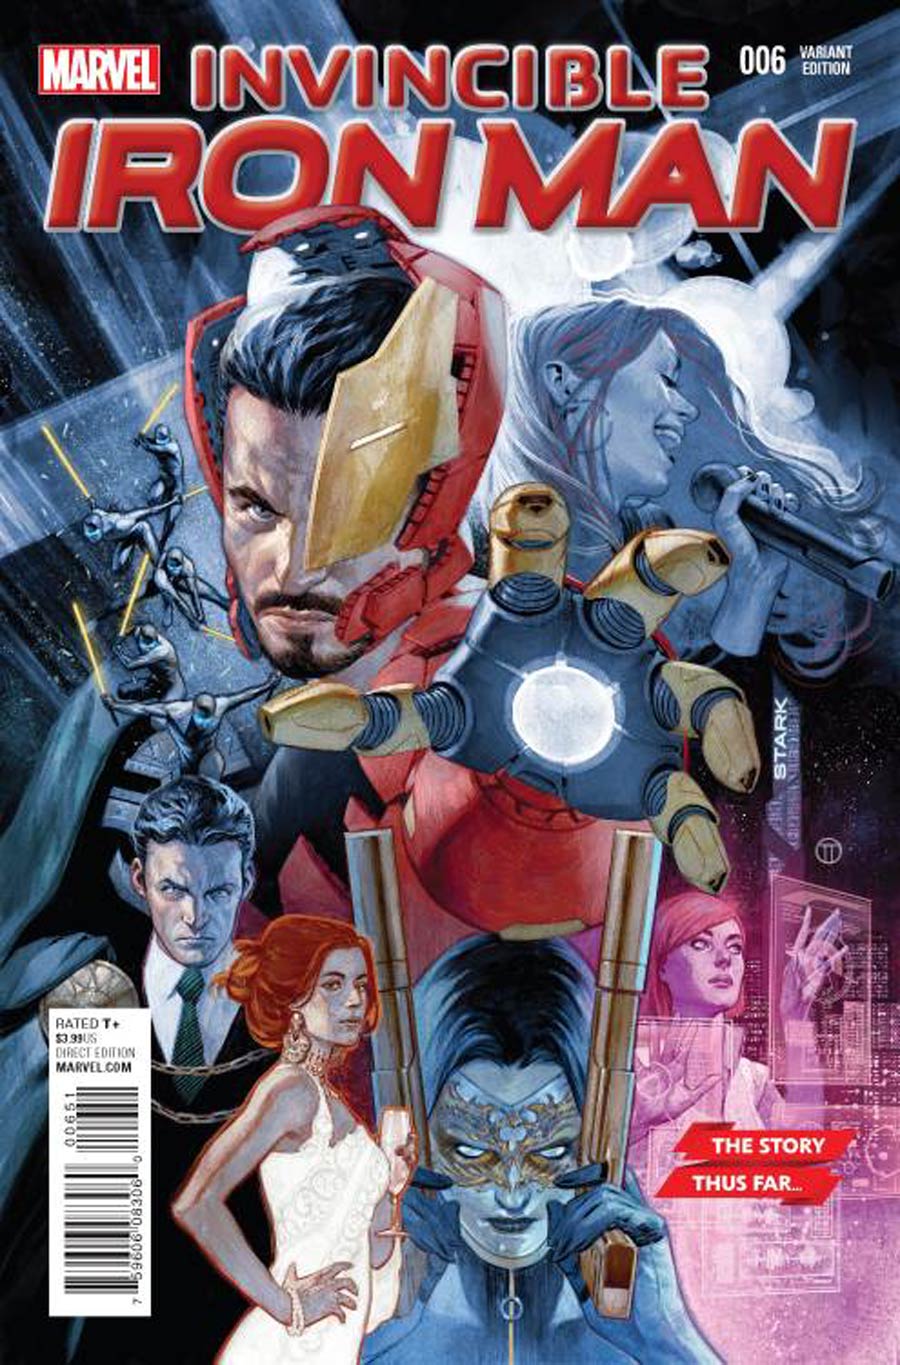 Invincible Iron Man Vol 2 #6 Cover C Incentive Story Thus Far Variant Cover